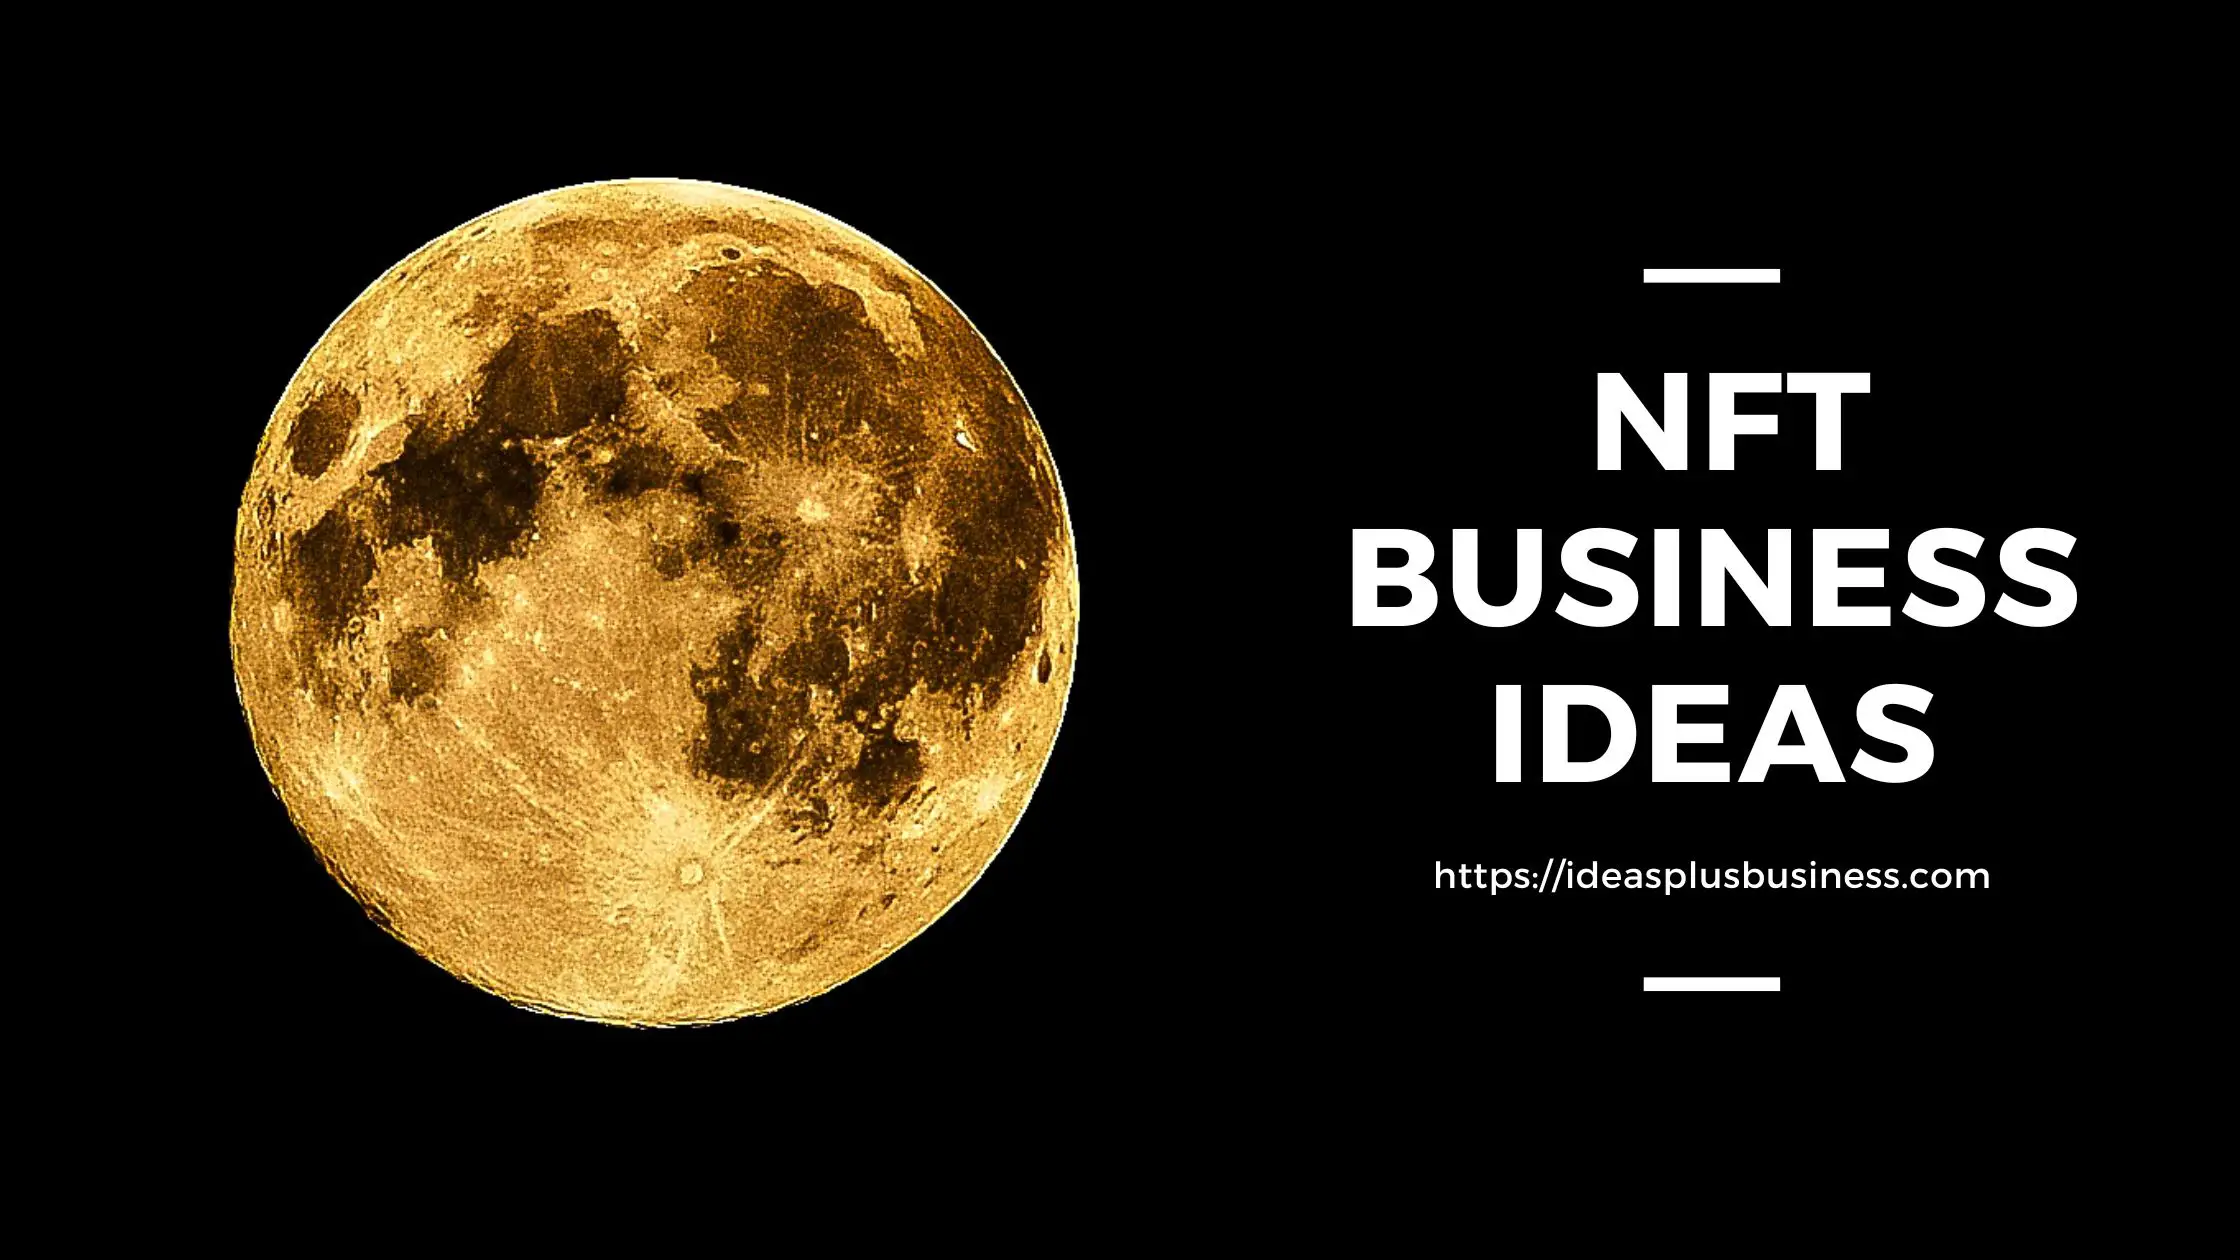 10 NFT Business Service Ideas You Can Consider To Make Money This Year 1 Expert tips to grow your business to success.